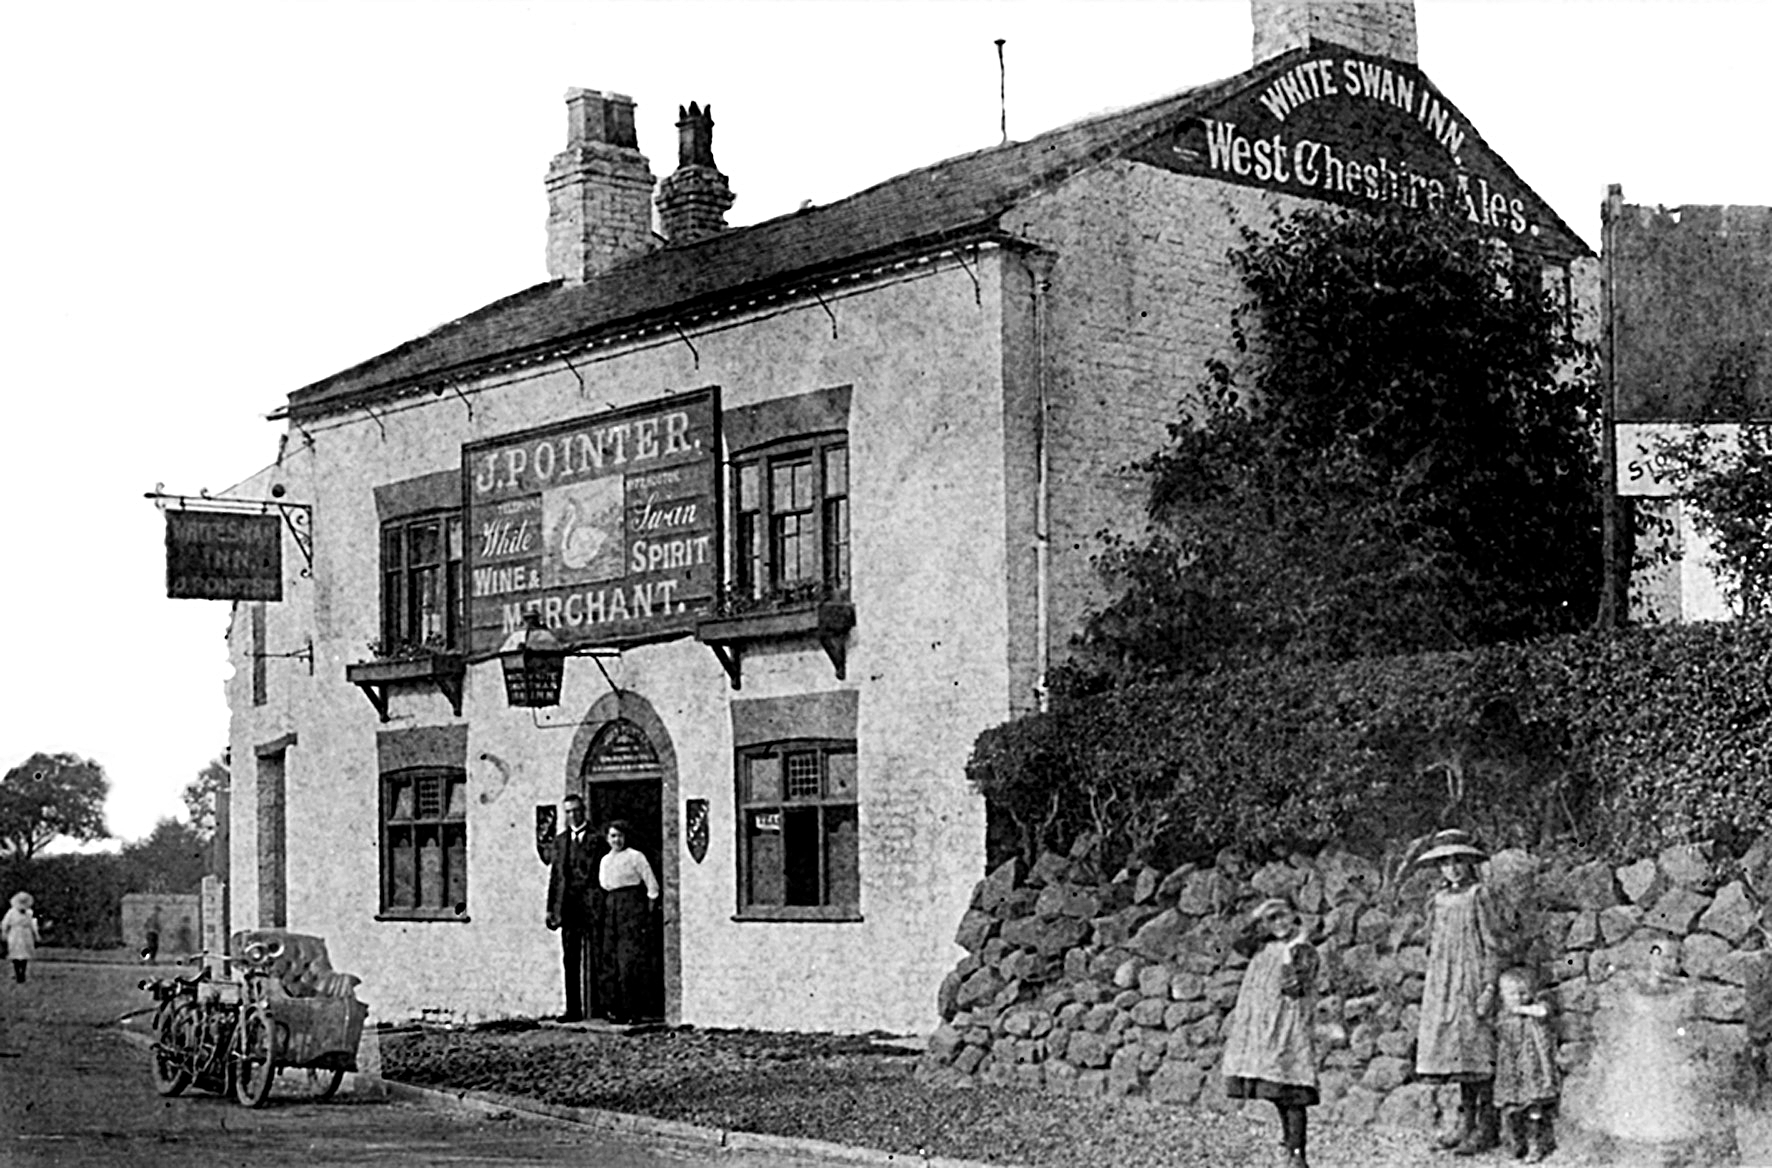 The White Sawn Inn, Great Sutton. Back in 1912